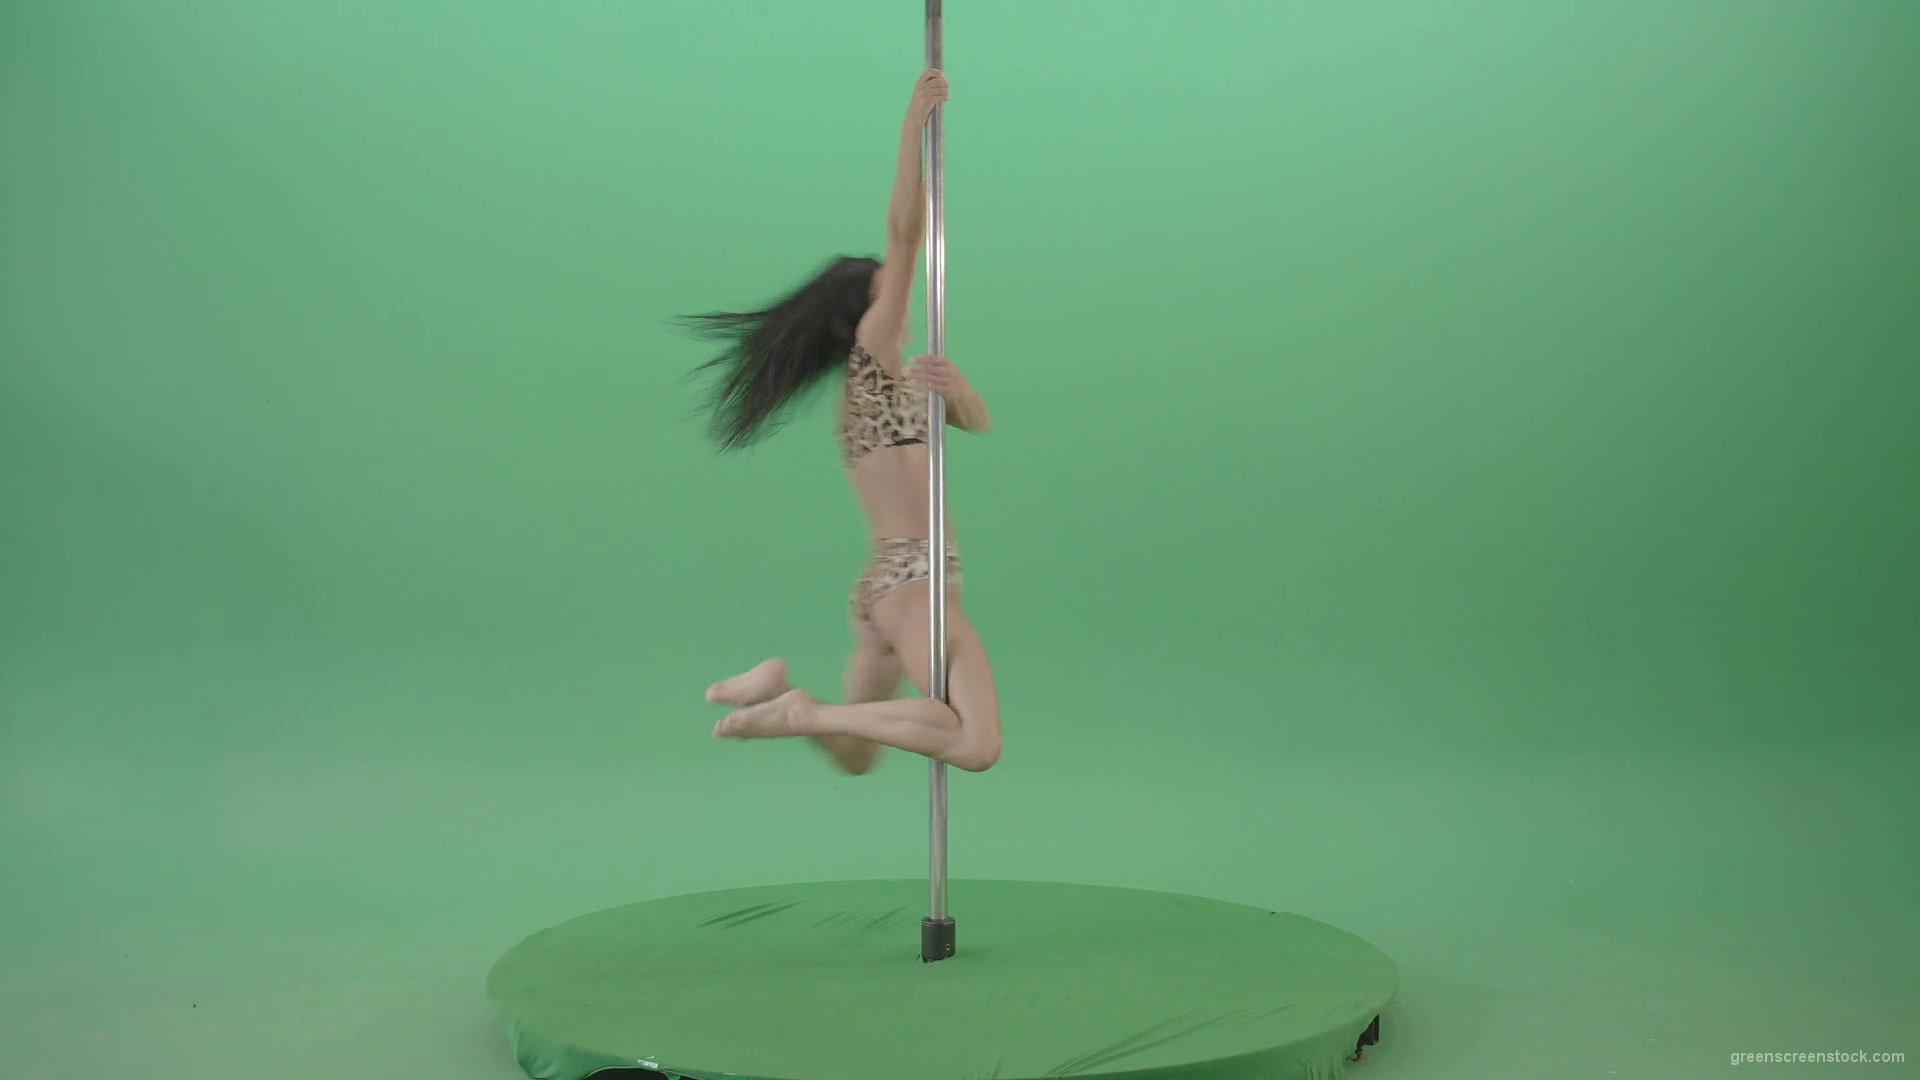 Glamor-girl-in-leopard-underwear-dancing-on-pilon-Pole-dance-and-spinning-isolated-on-Green-Screen-Video-Footage-1920_005 Green Screen Stock